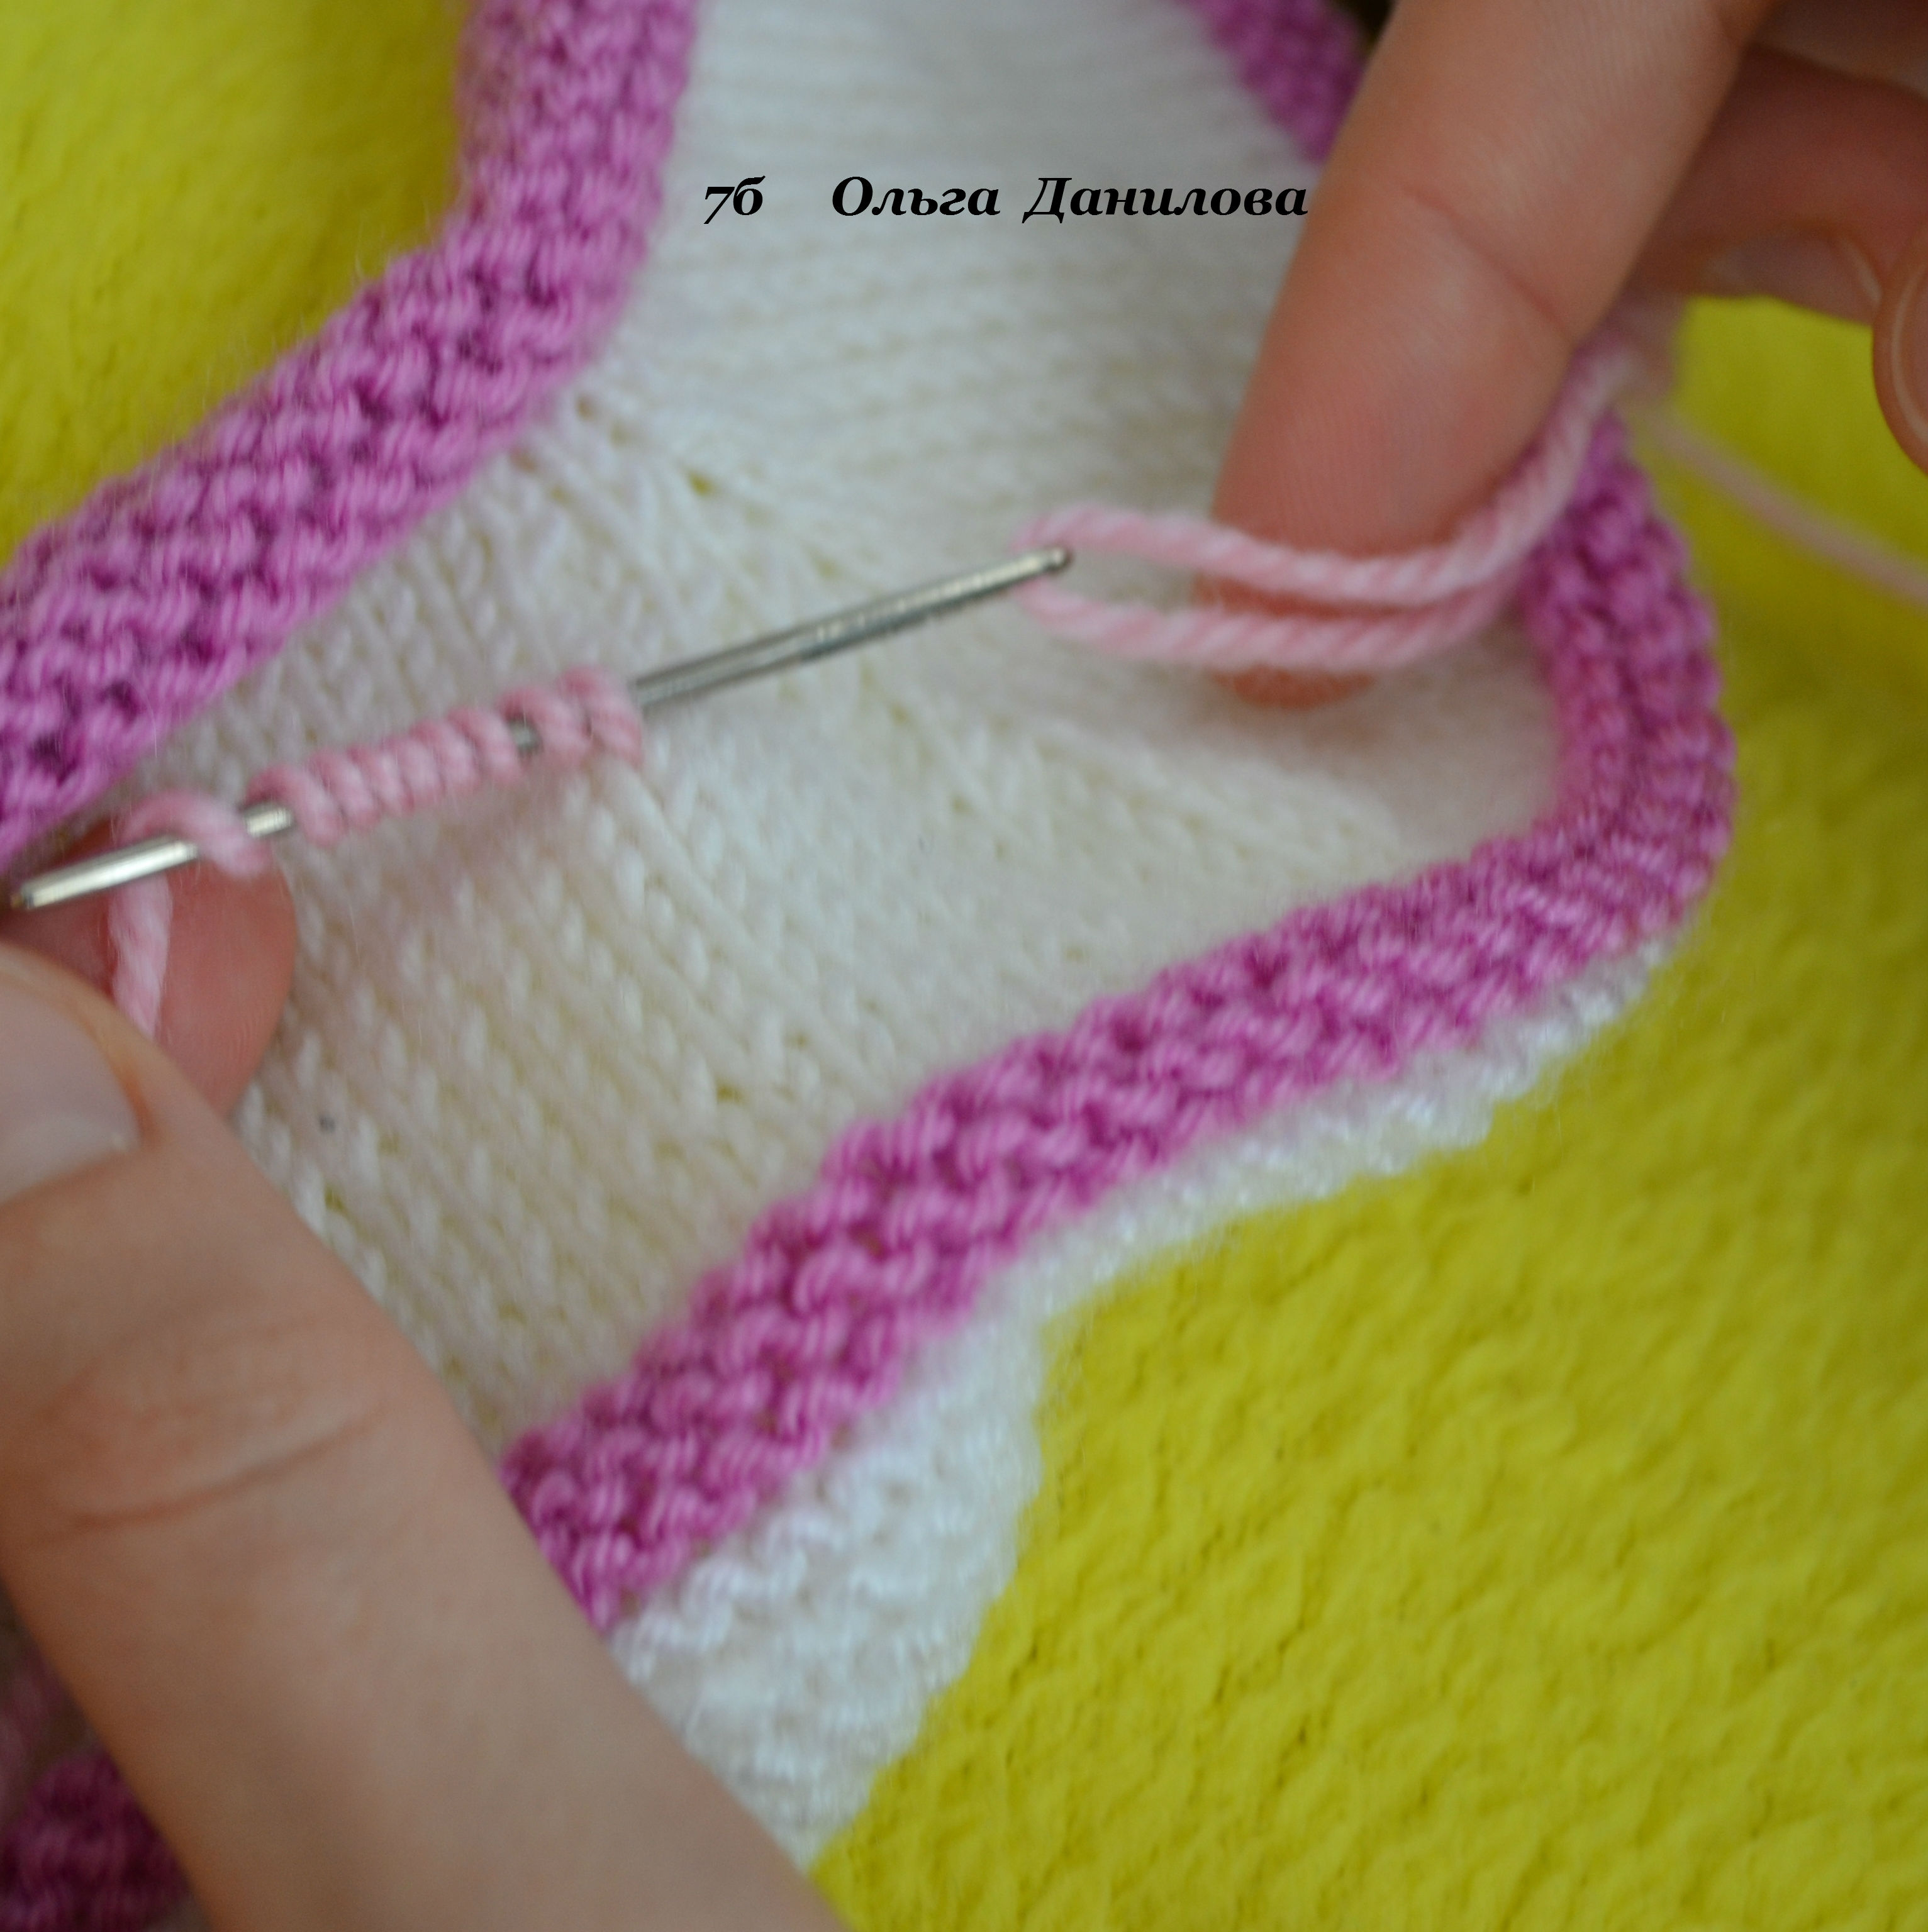 How-to-Make-Pretty-Knitted-Baby-Booties-8.jpg